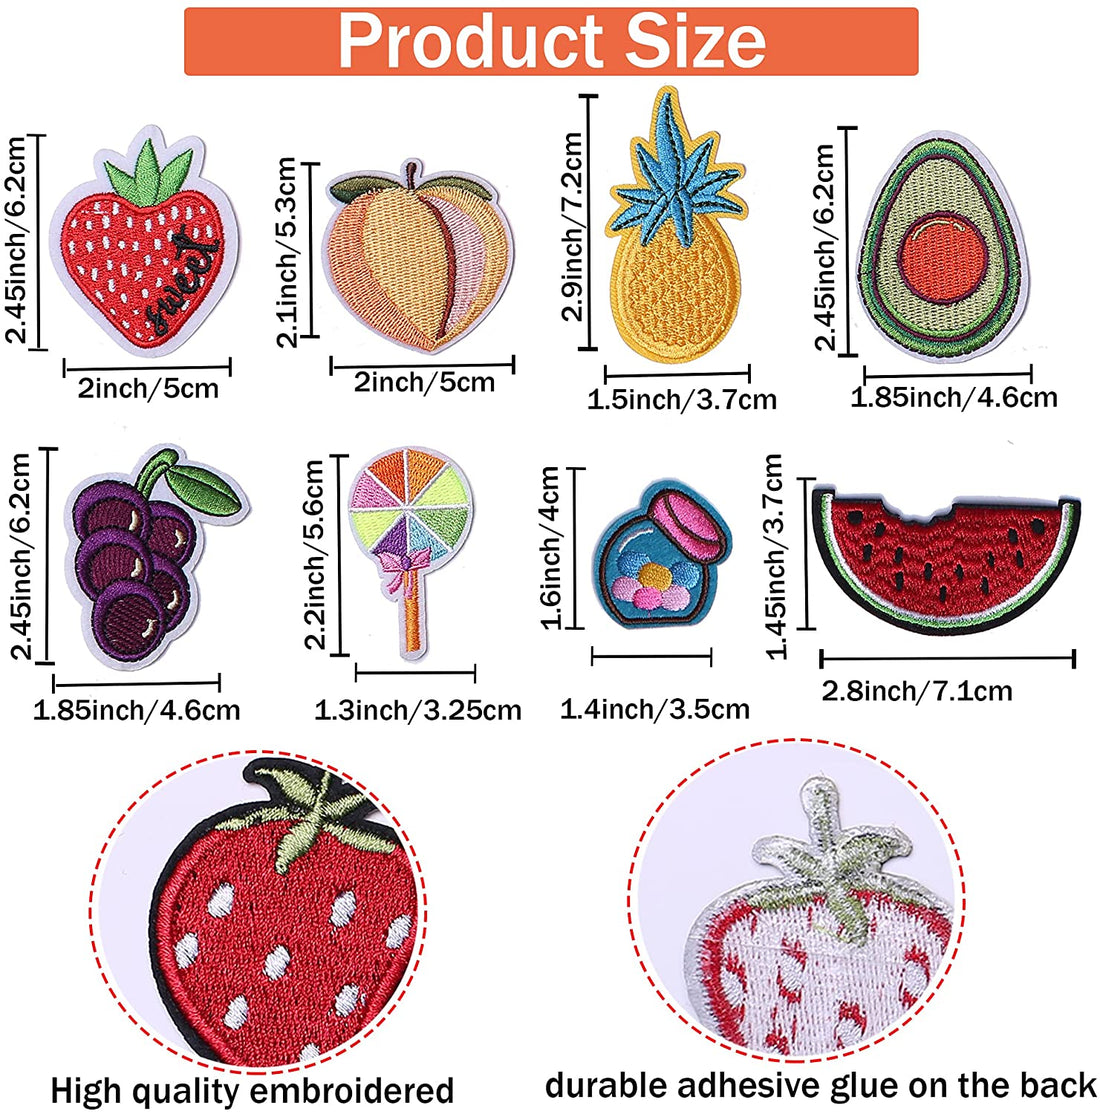 Fruit Embroidered Iron on Patch for Clothes, Iron-on Patches / Sew-on Appliques Patches for Clothing, Jackets, Backpacks, Caps, Jeans